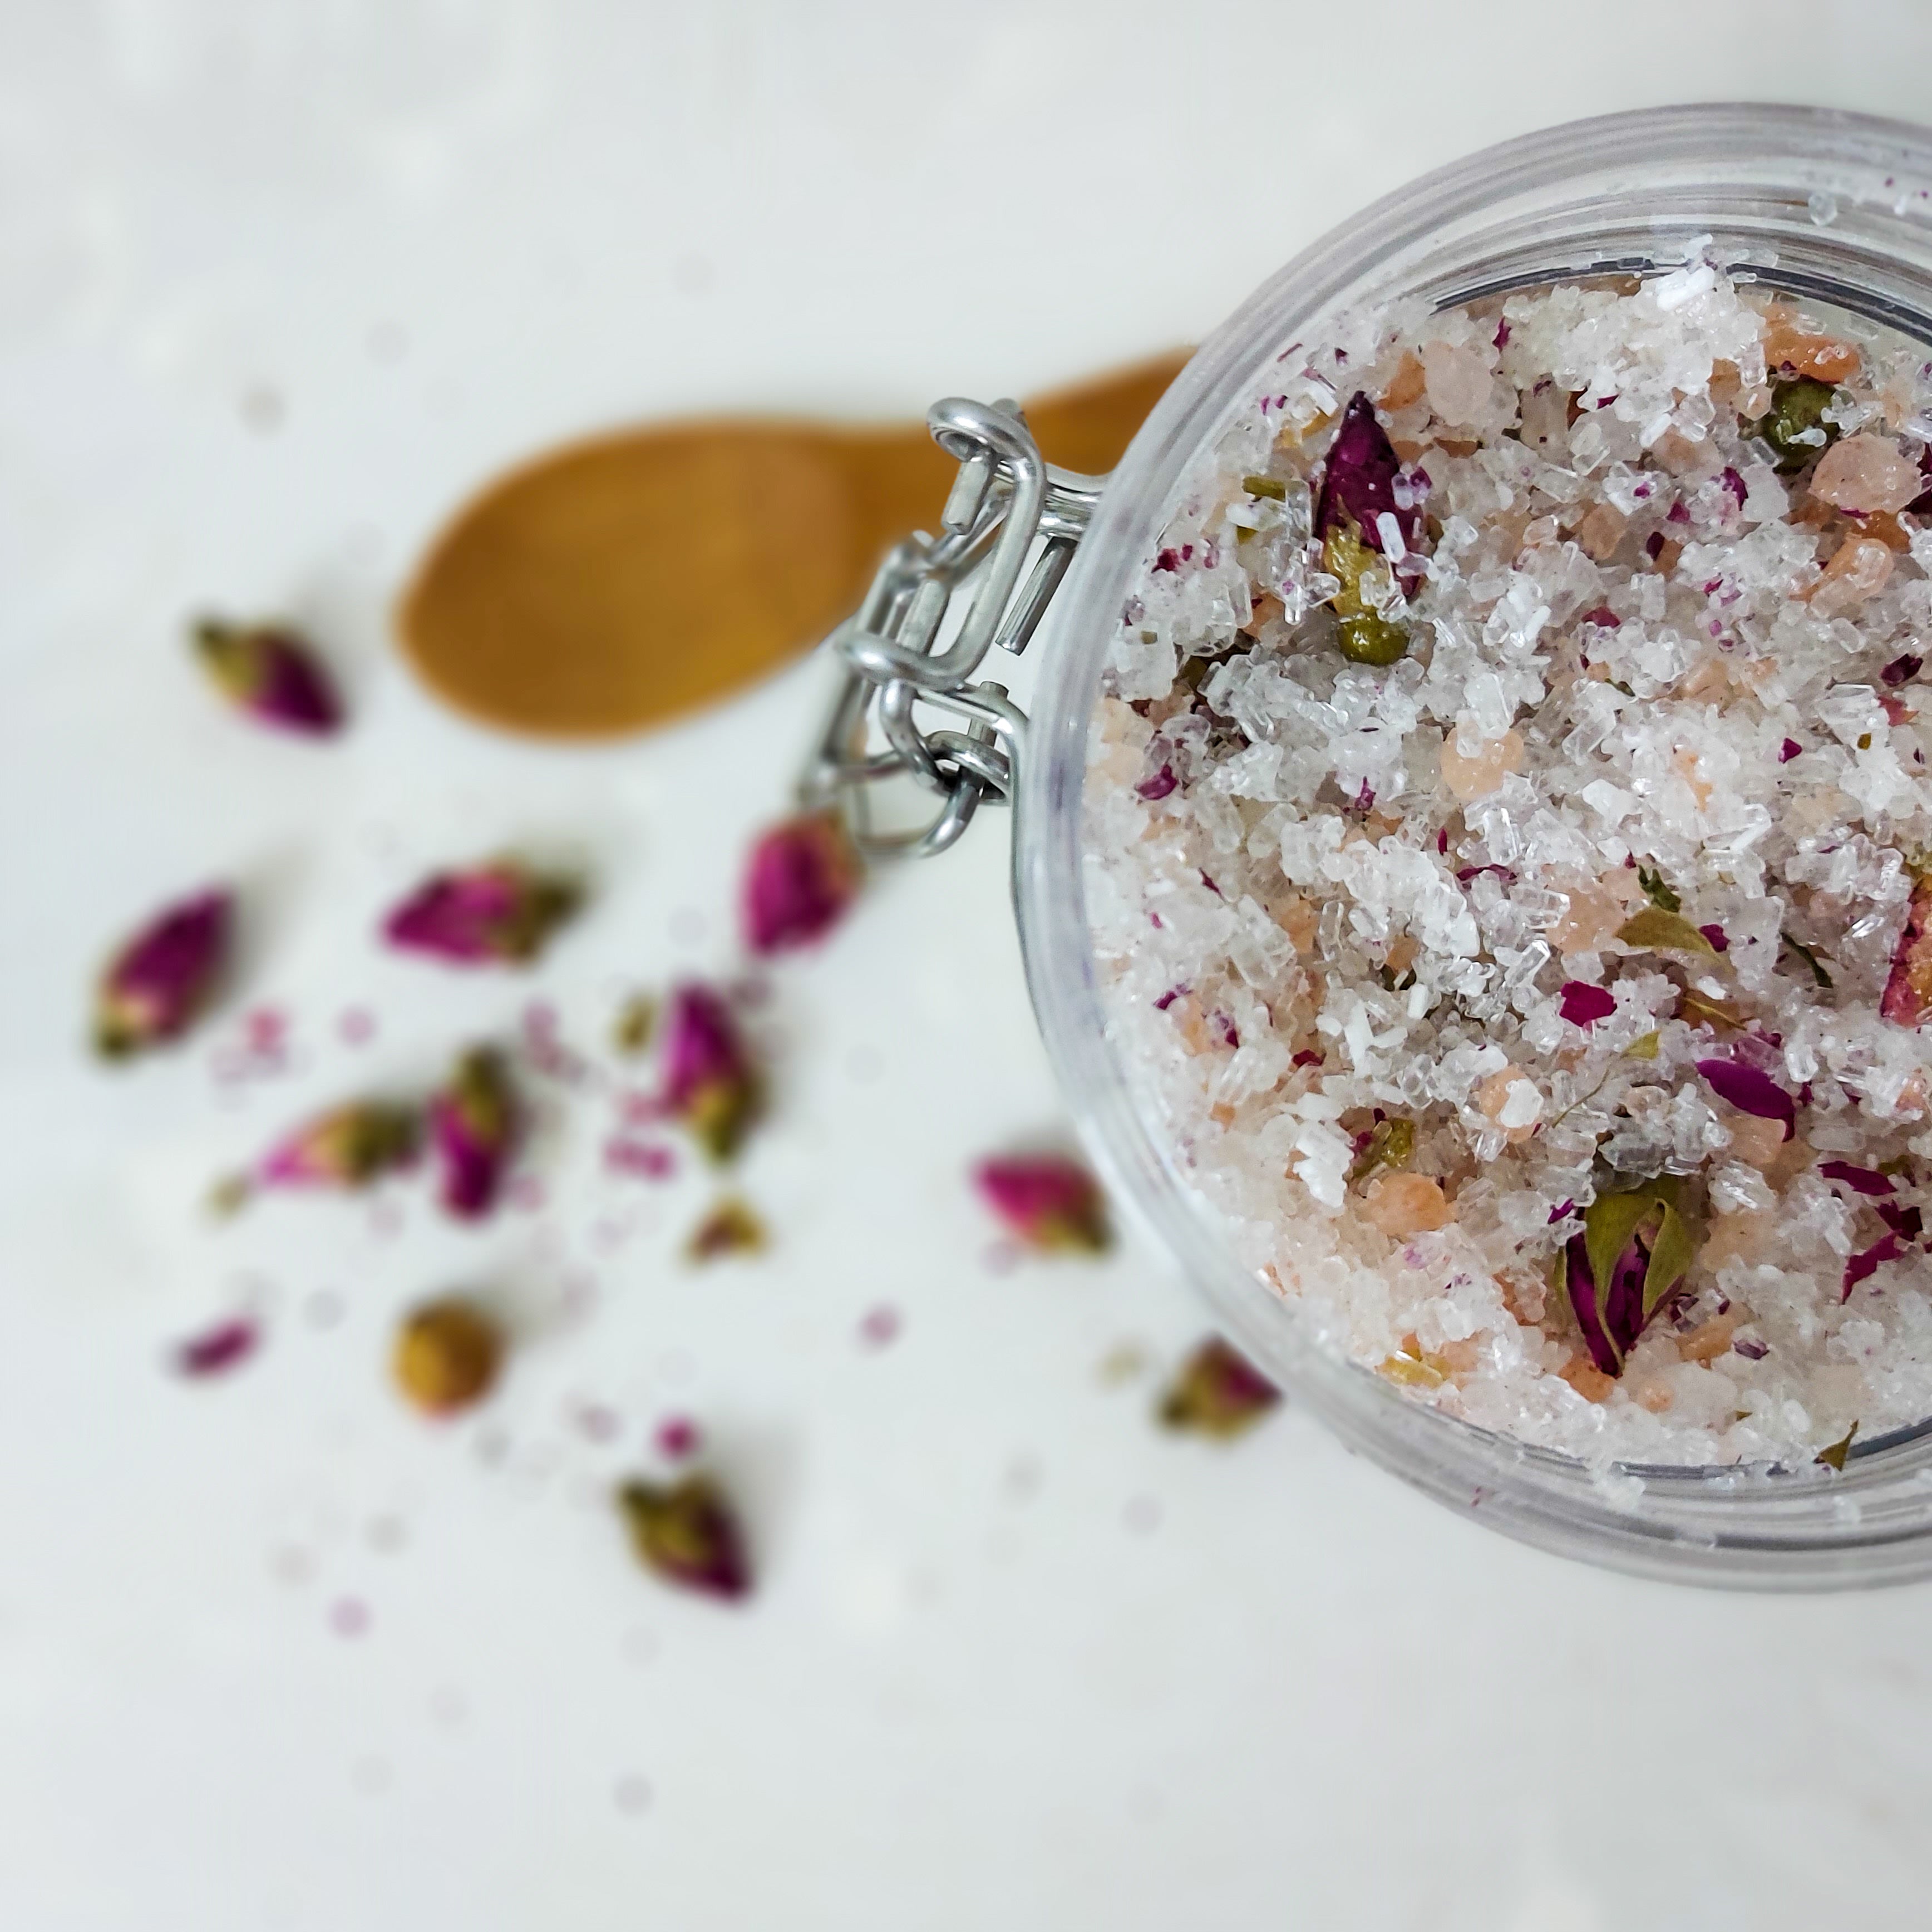 Take me to Everest natural bath salts with shea butter, rose oil, Dead Sea salts, Himalayan salts, and dried roses. 350 ml. Monarchess Natural Luxuries skincare products. monarchess, Amman, Jordan